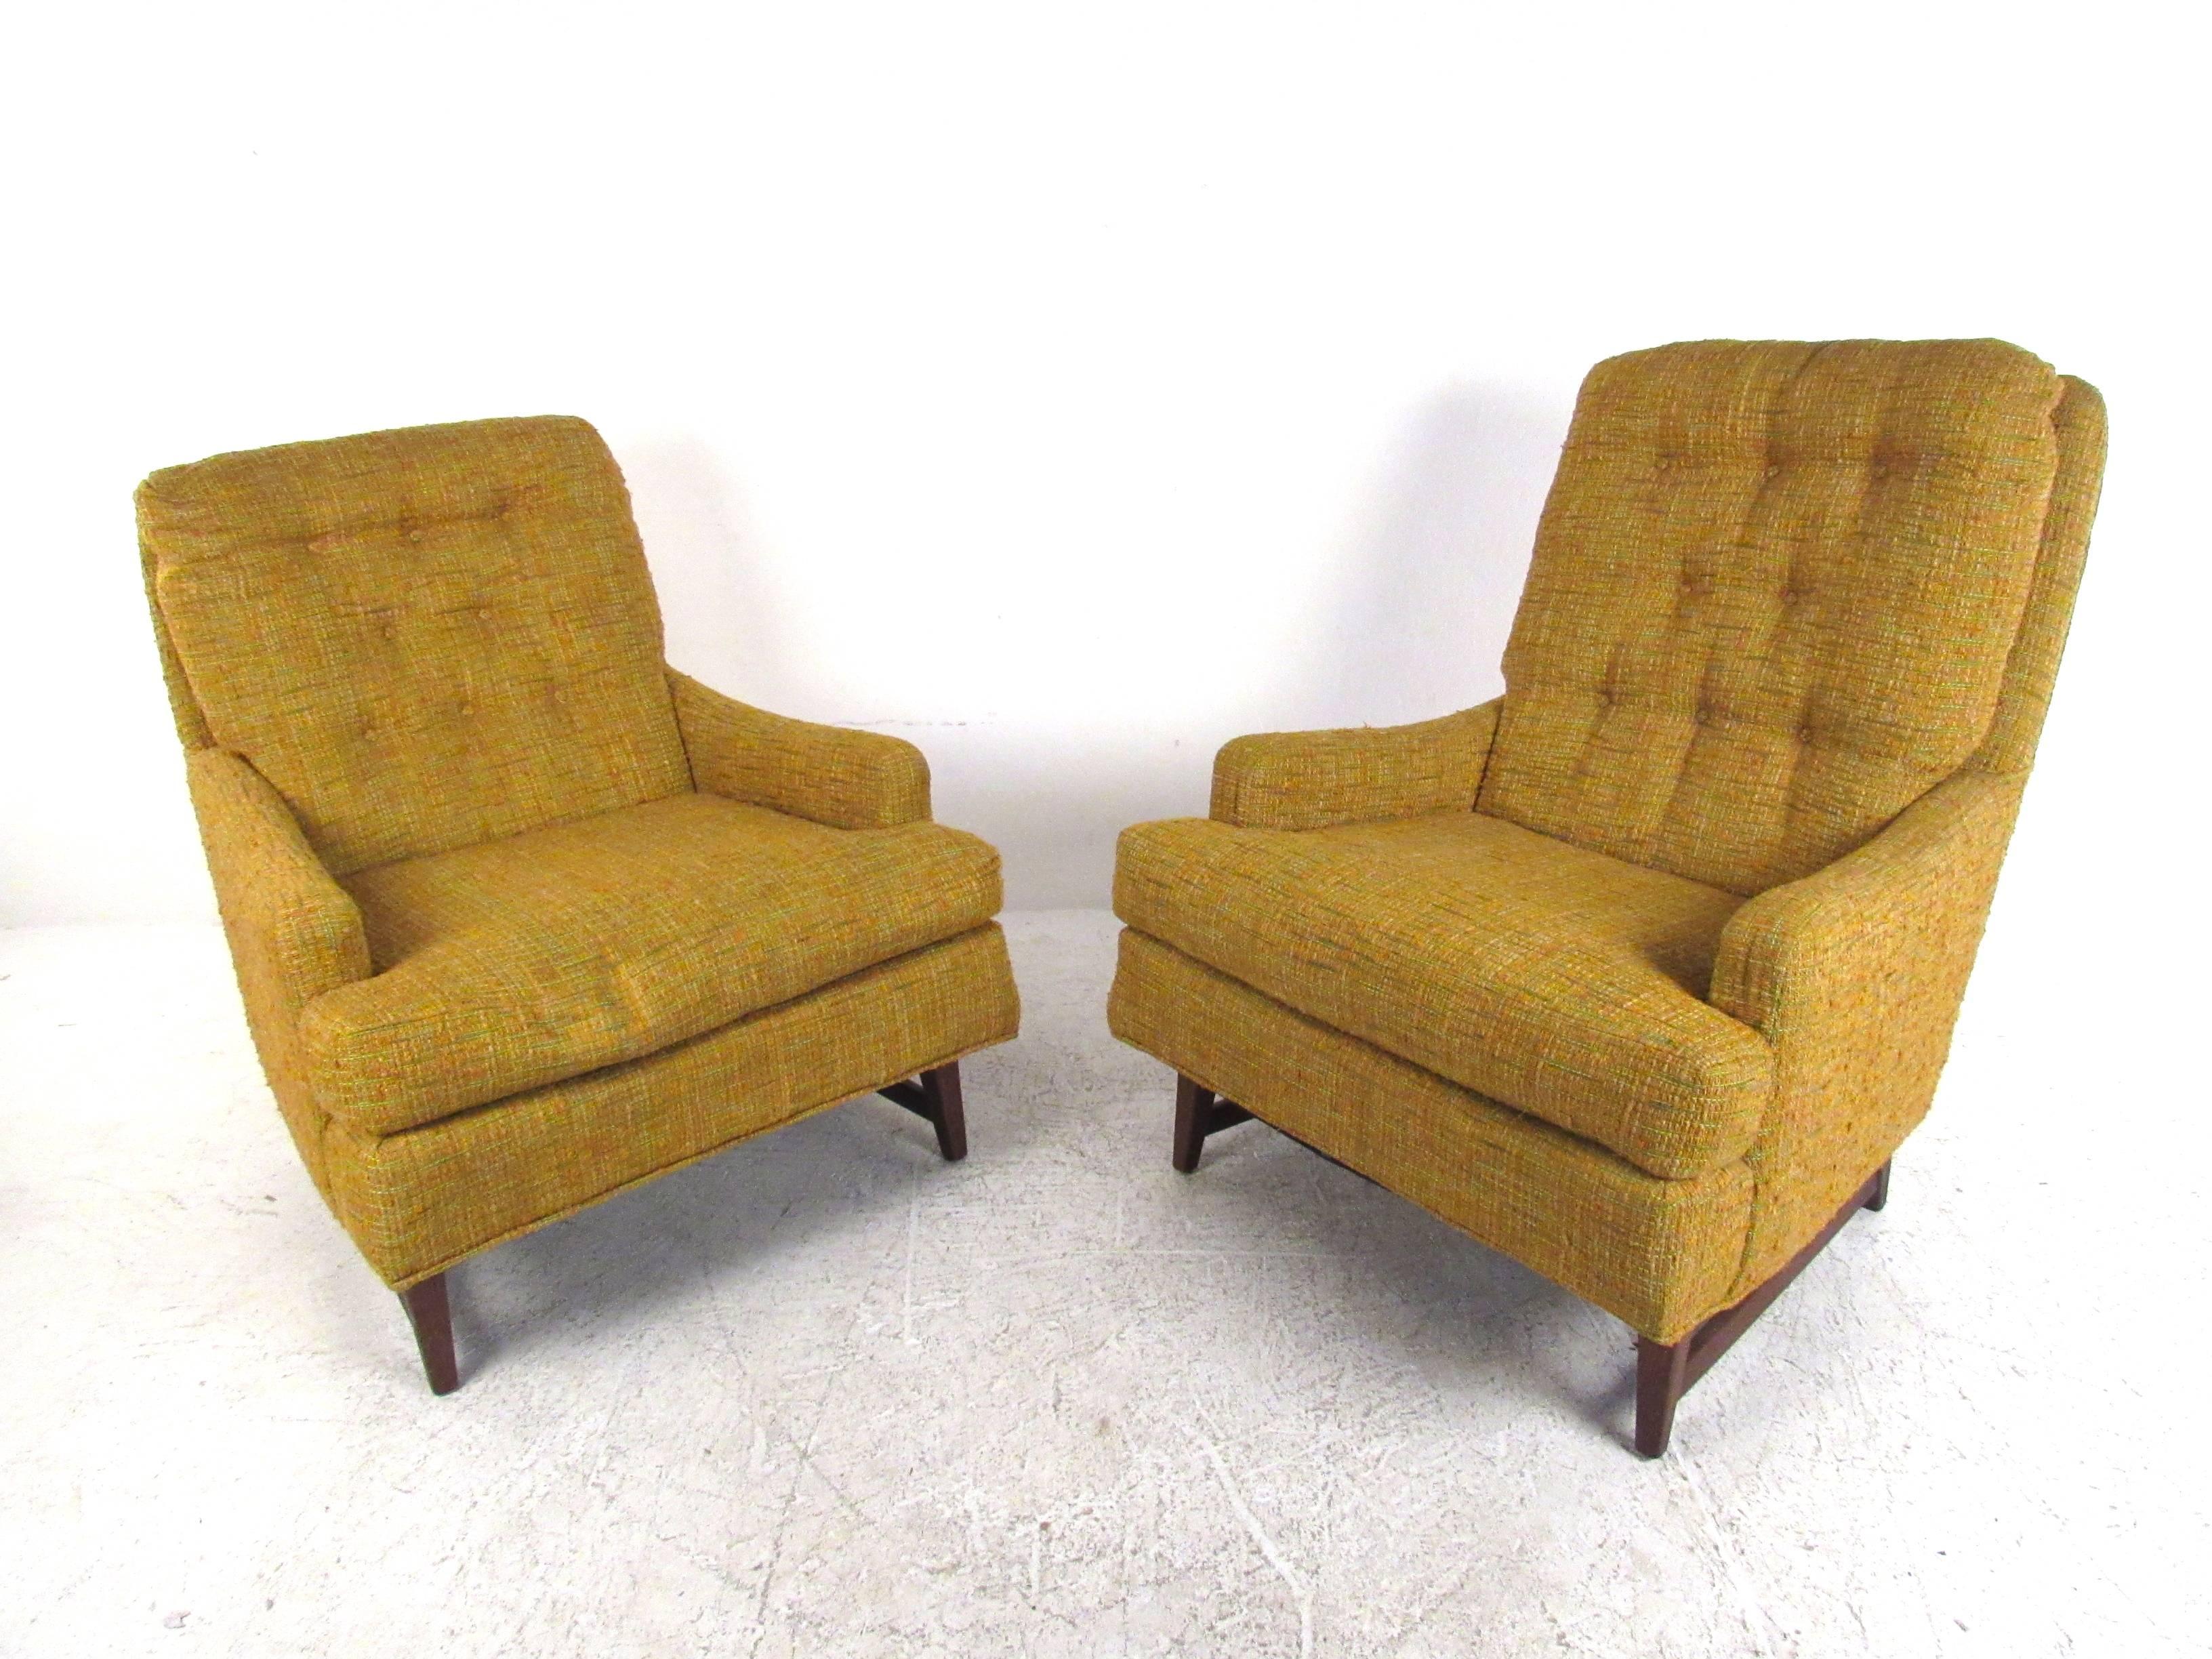 This vintage  lounge chairmakes a comfortable Mid-Century addition to any seating arrangement. Vintage tufted fabric, plush upholstery, and classic vintage style make this an ideal chair for home or lounge use. Please confirm item location (NY or